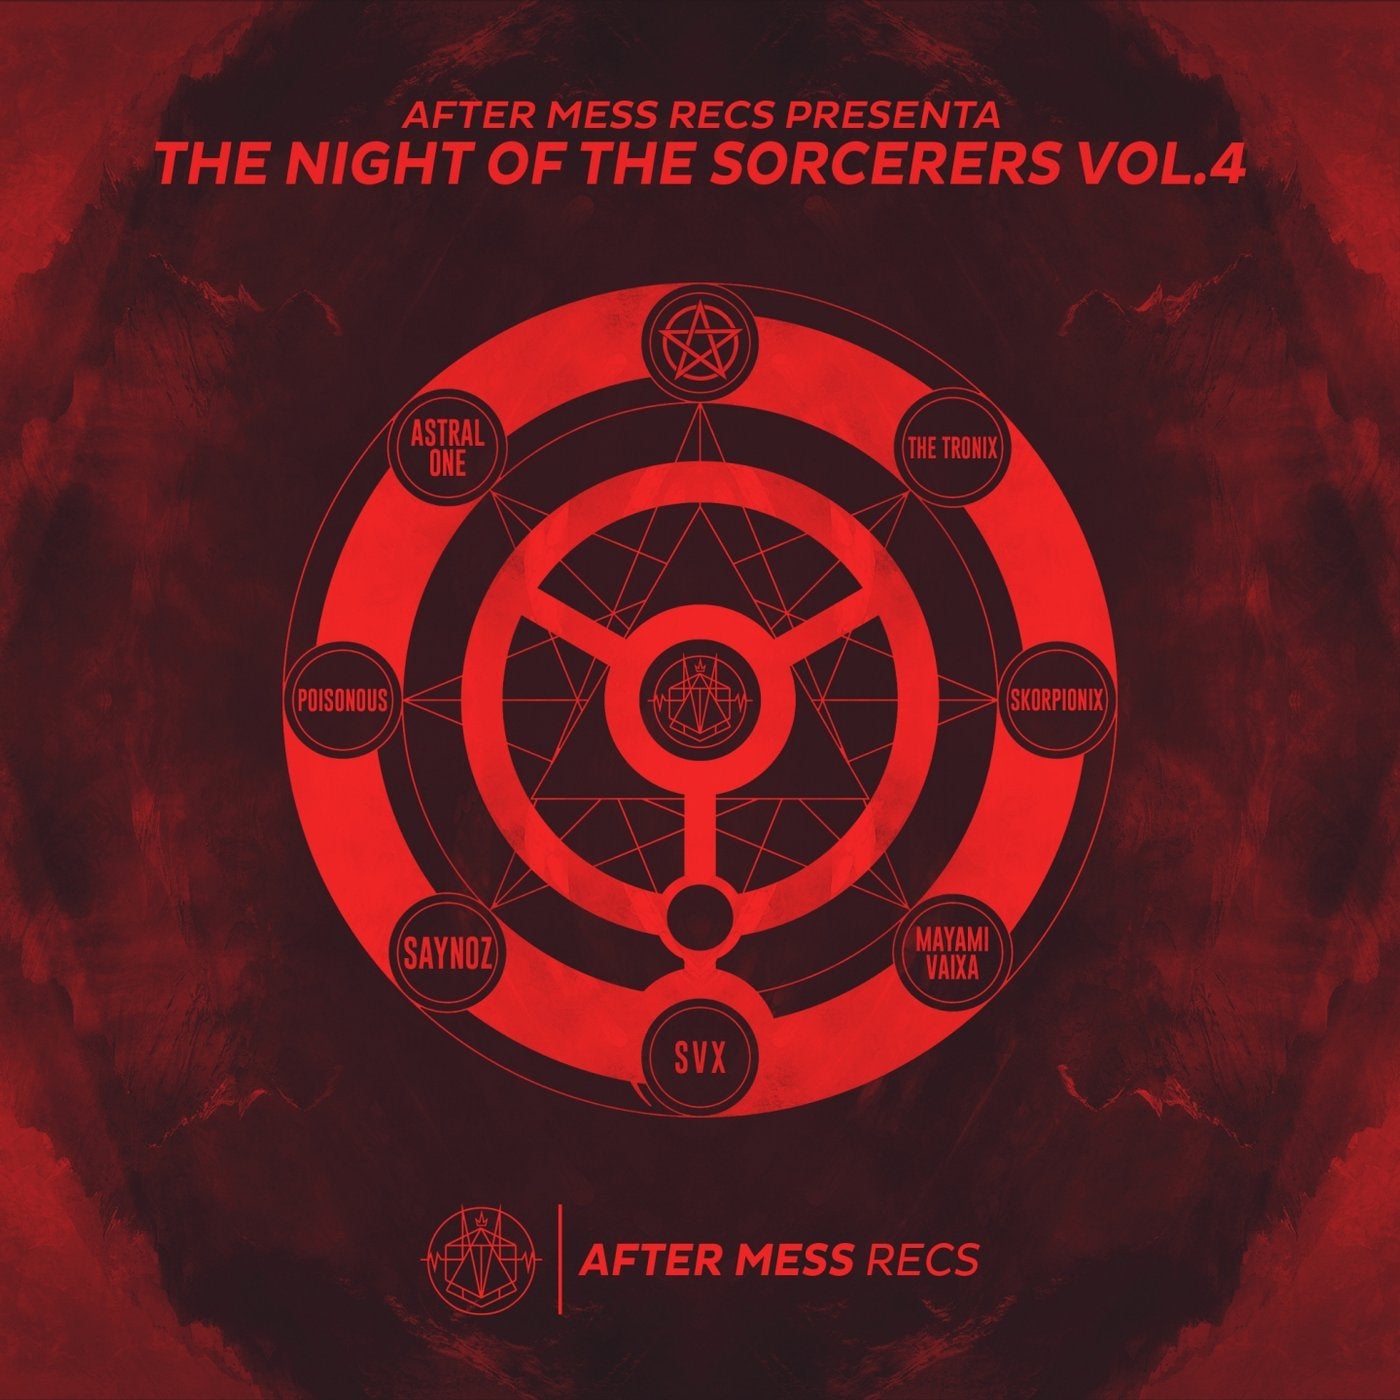 The Night of the Sorcerers, Vol. 4